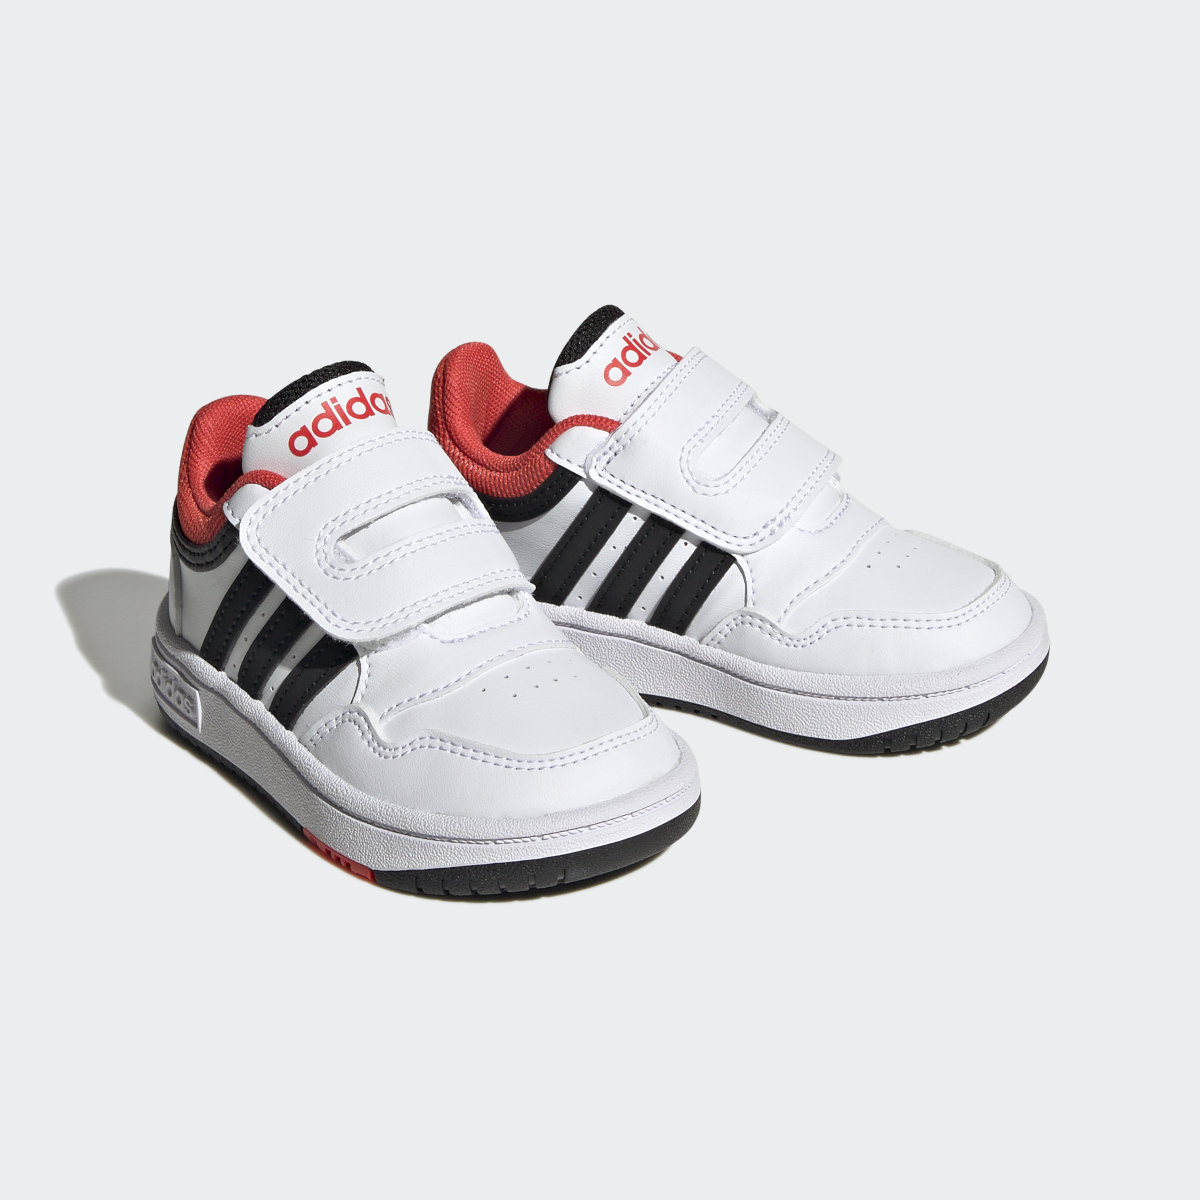 Adidas Hoops Shoes. 5